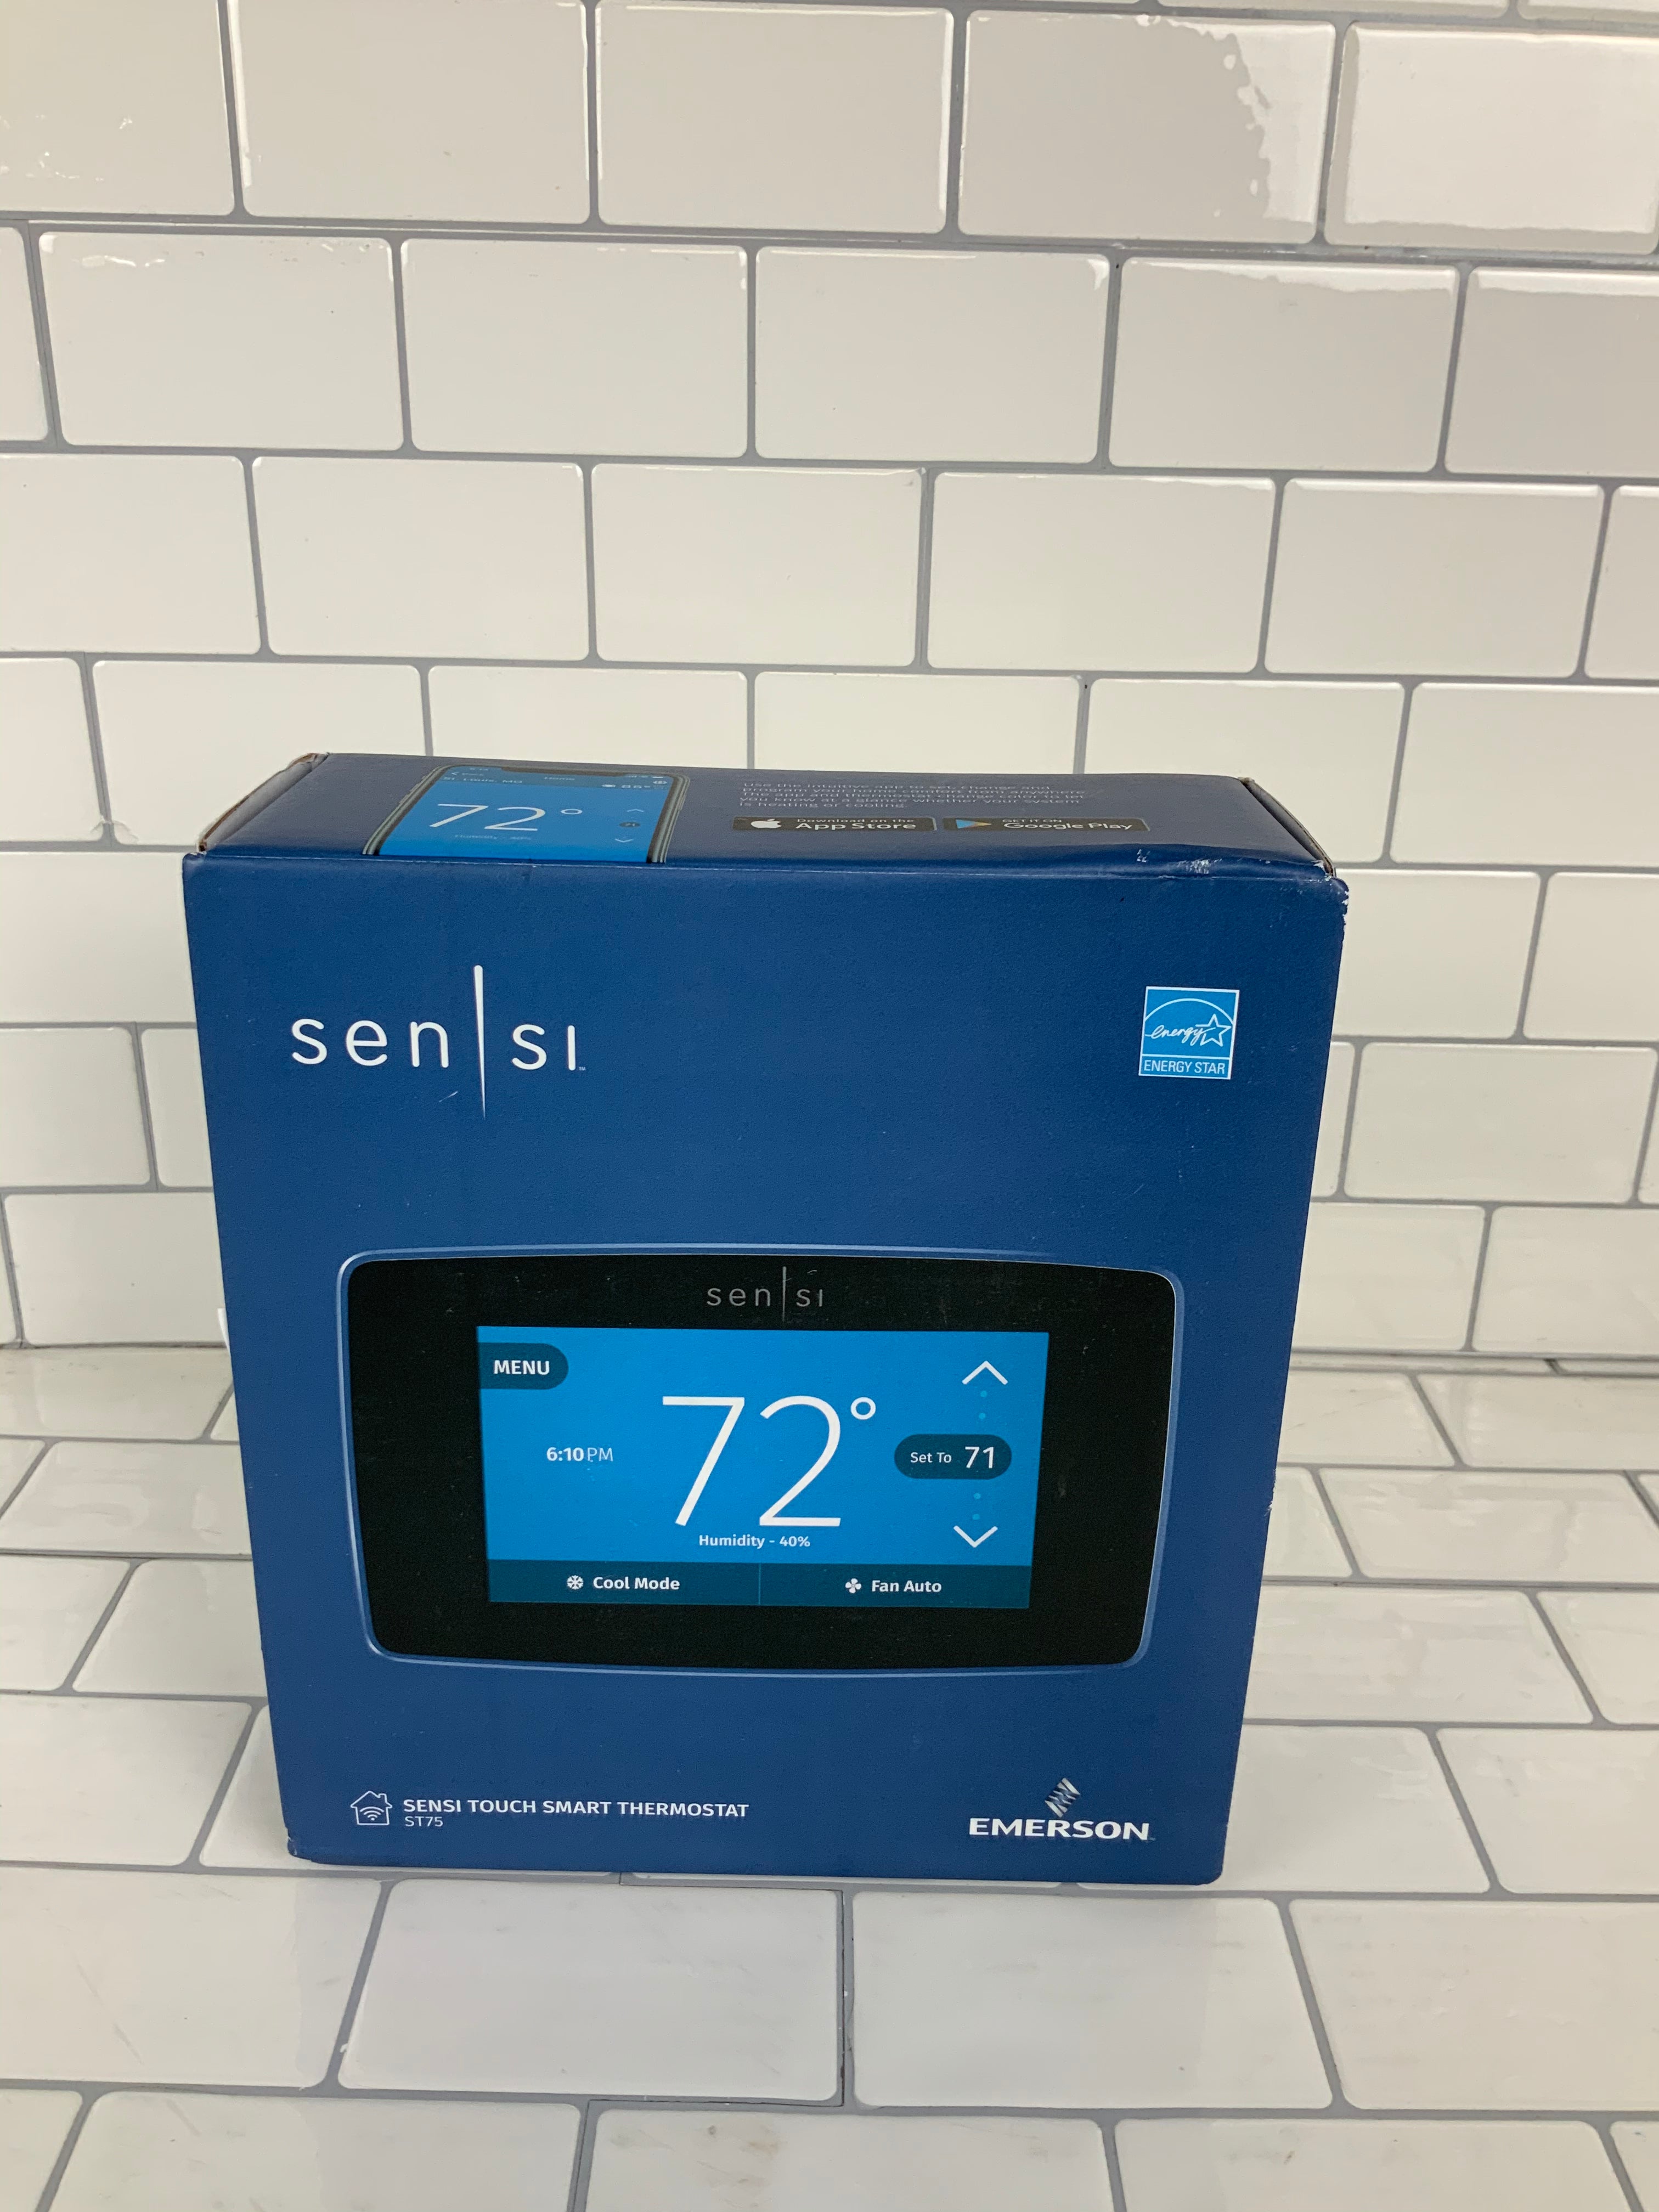 Emerson Sensi Wi-Fi Smart Thermostat w/Touchscreen Color Display-C-wire Required (7452570616046)